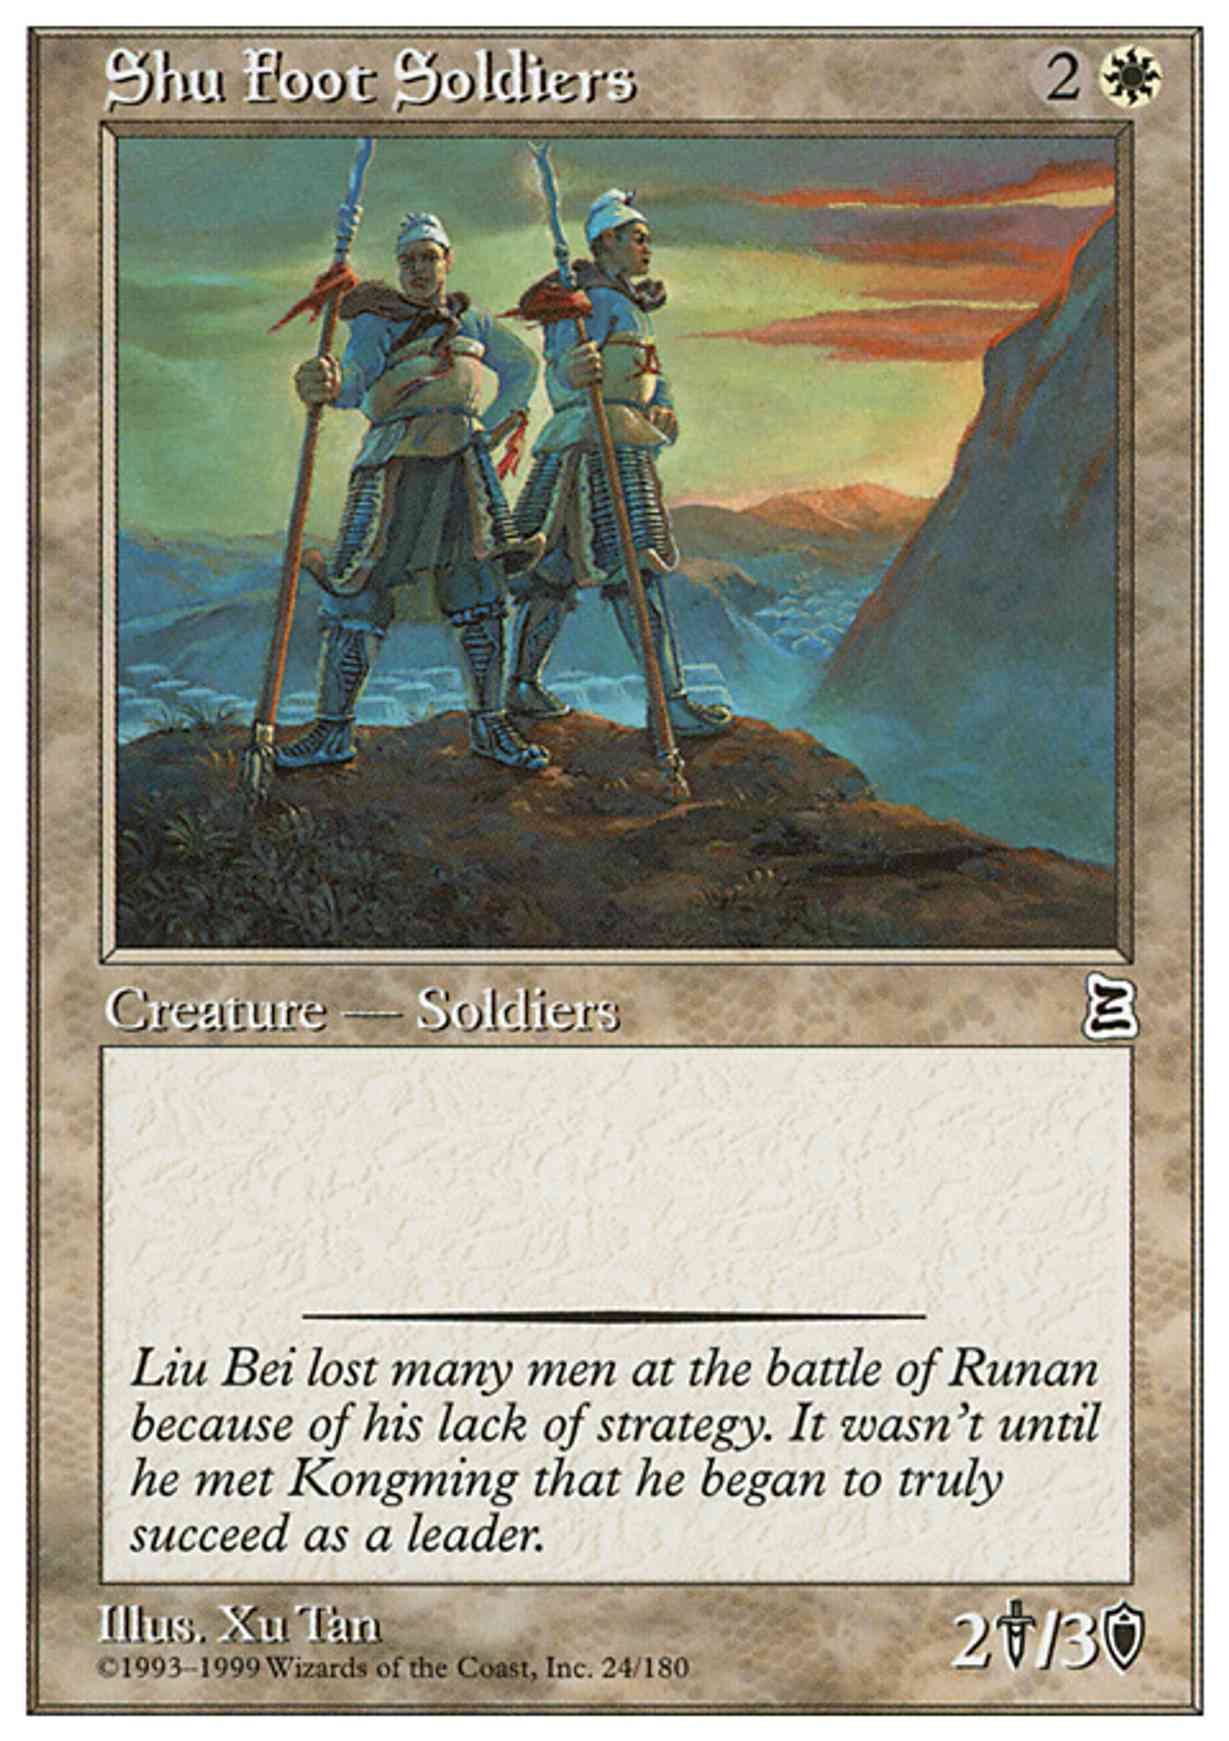 Shu Foot Soldiers magic card front